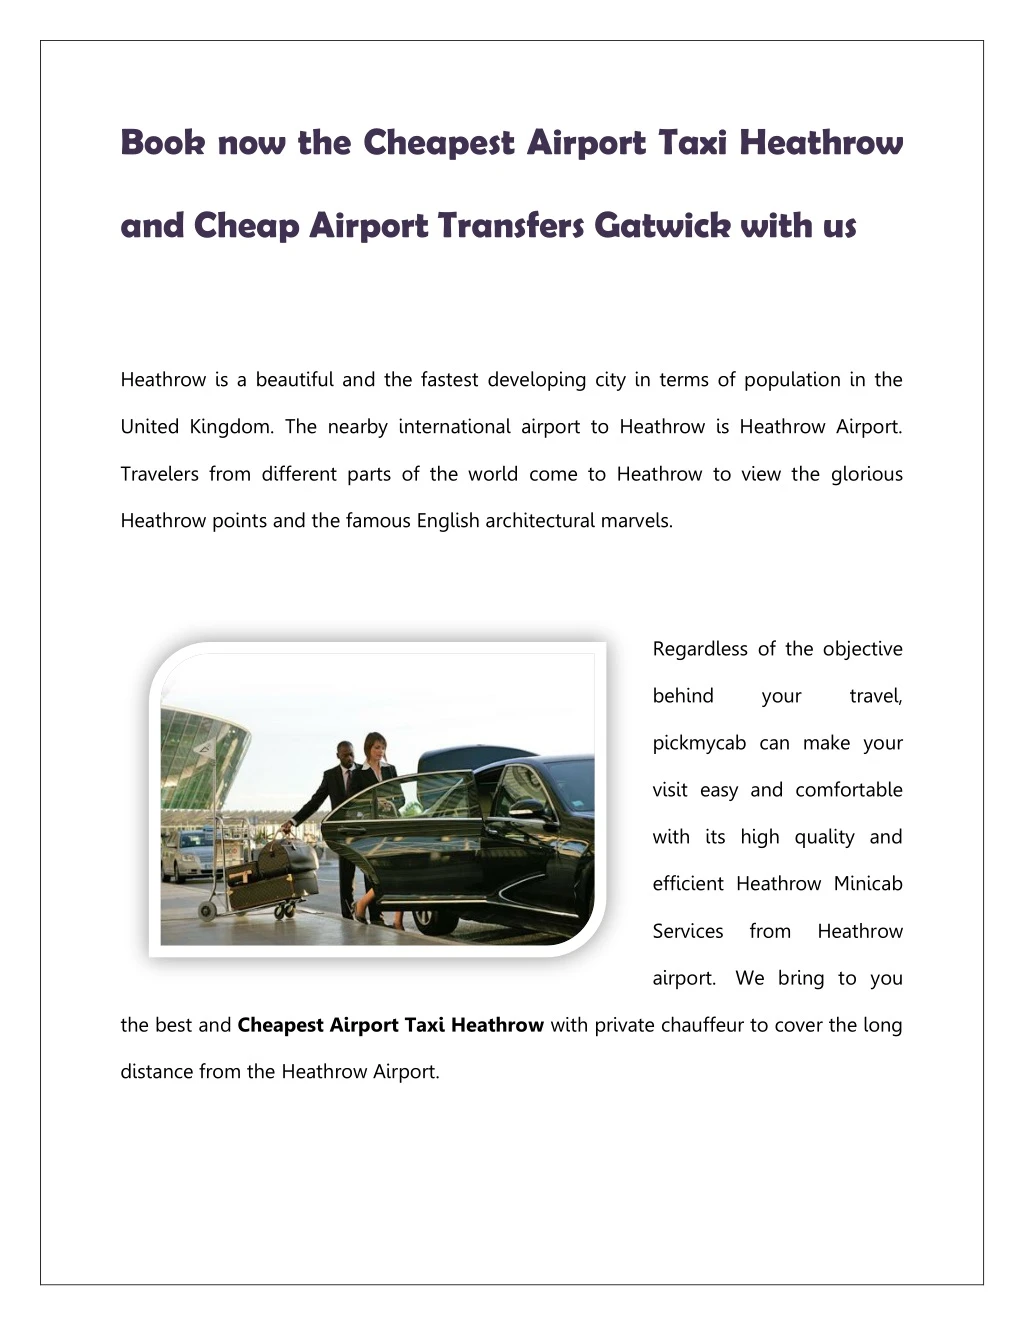 book now the cheapest airport taxi heathrow